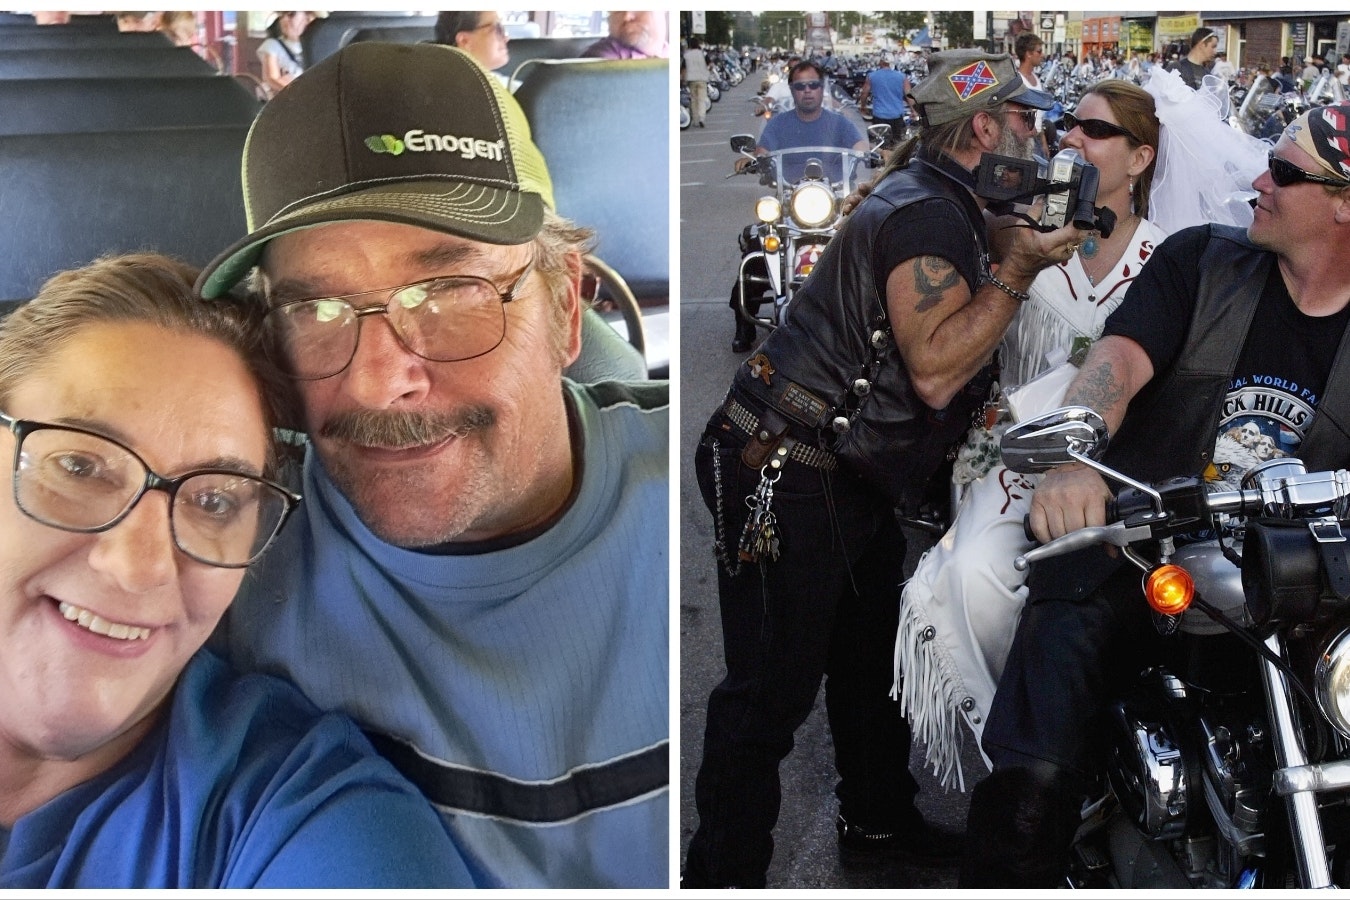 Sheila and Russell Klein, left, had no clue they were honeymooning in the heart of the Sturgis Motorcycle Rally after they married 40 years ago. Now they've returned to celebrate their anniversary. The annual party has hosted many biker weddings over the decades, right.